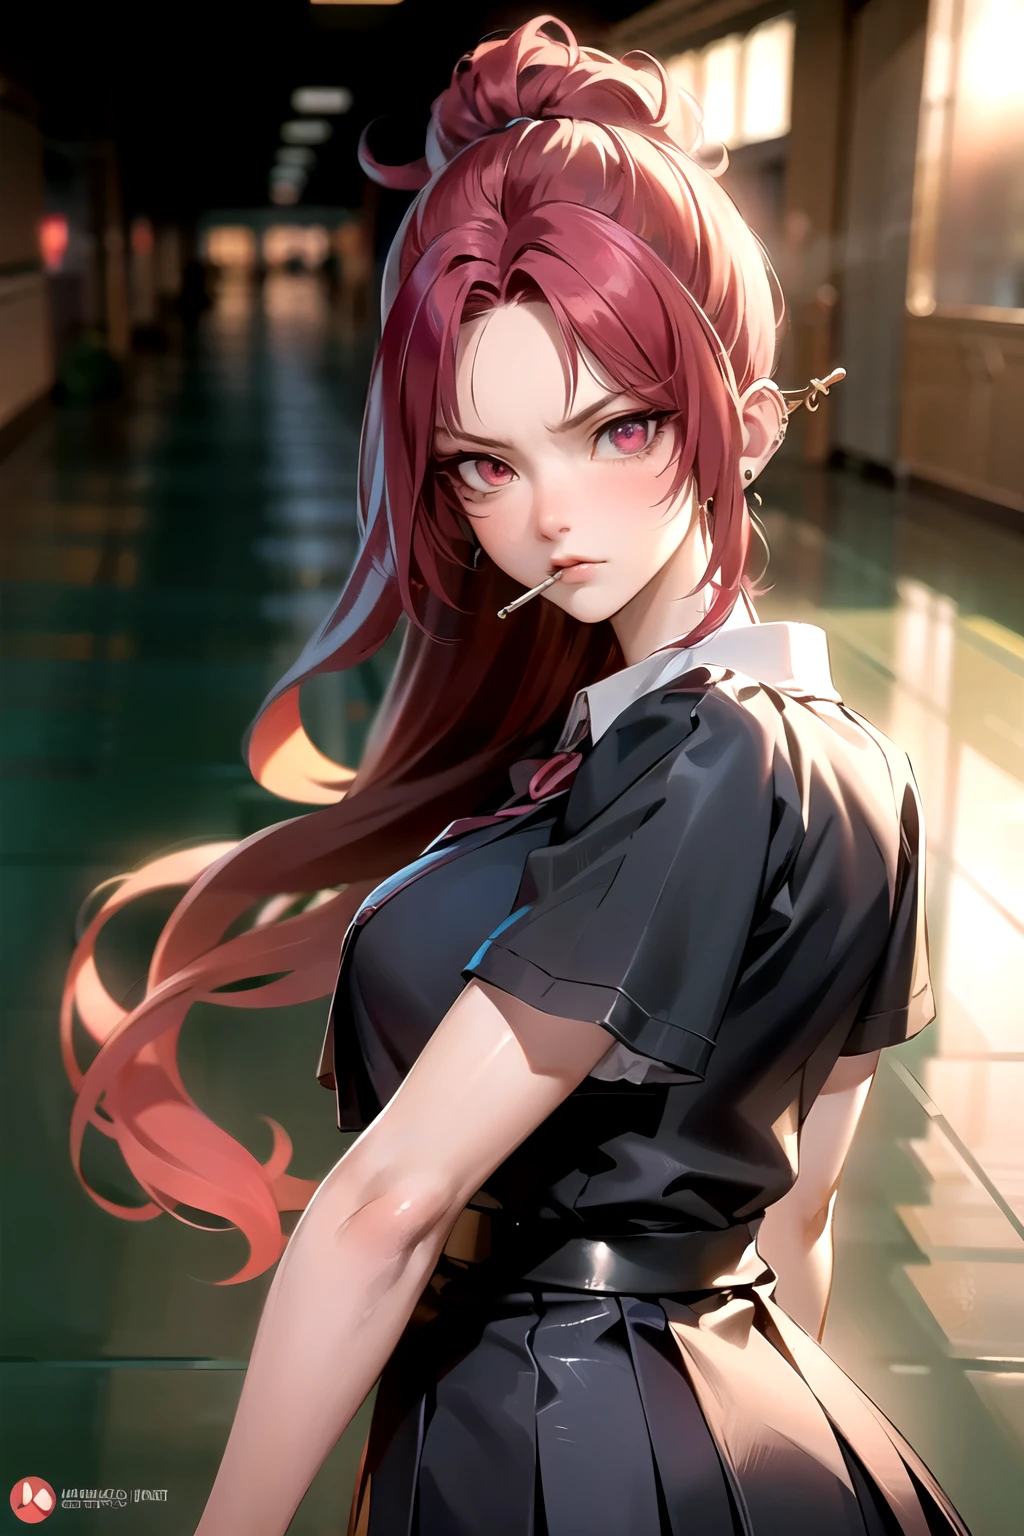 ((best quality)), ((Masterpiece)), (details:1.4), 3d, bad student, mean woman, Most popular woman, stare, angry, Smoking, challenge, Ear piercing, high school girl , red hair, long hair, Shiny skin,  fine hair, ใบหน้าที่มีdetails, (beautiful scenery), school hallway, at night,